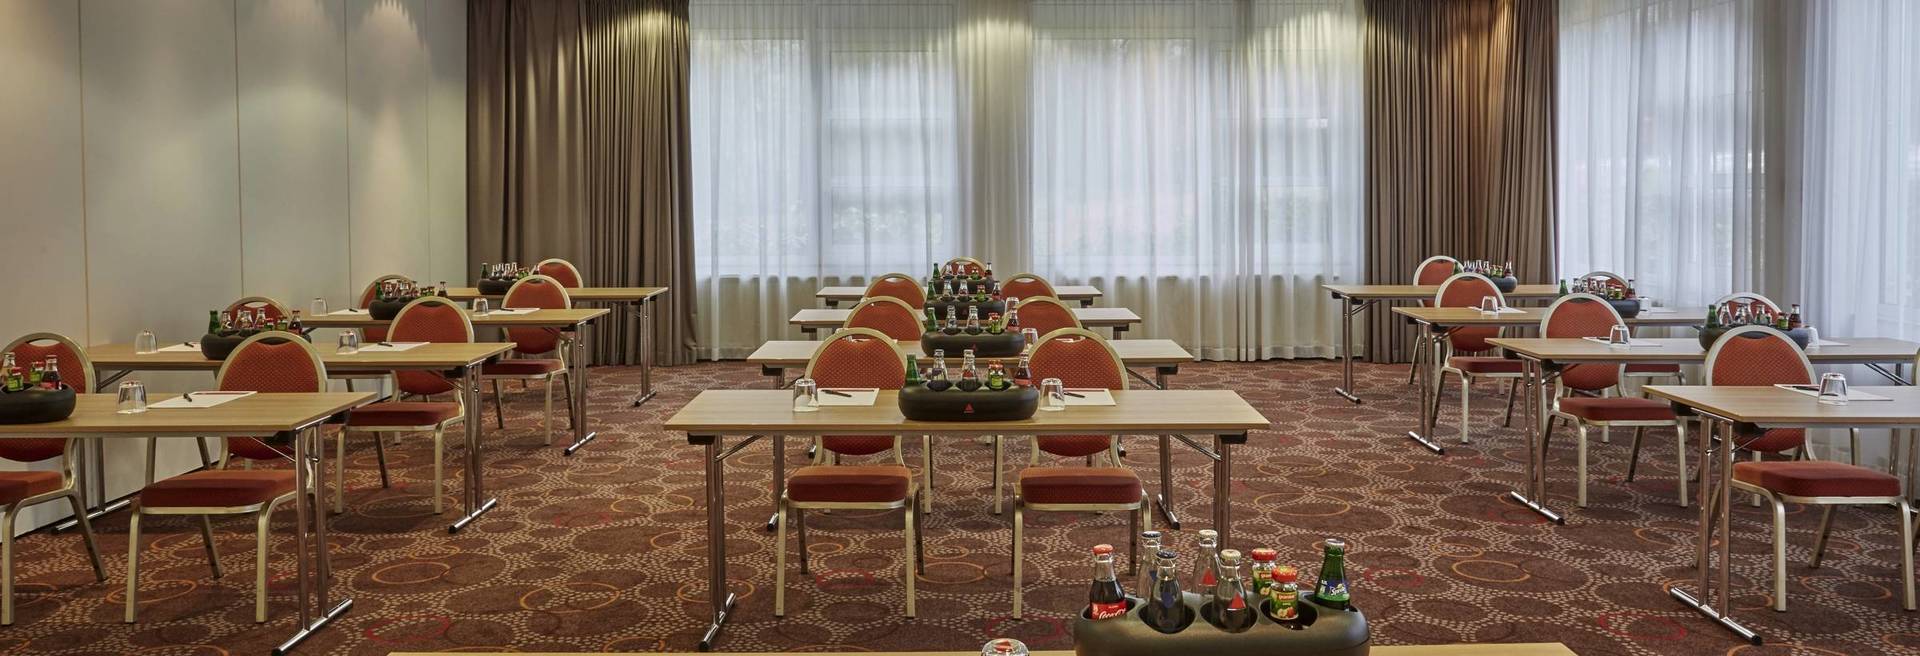 Venues, catering, and accompanying programmes for successful events - H+ Hotel Wiesbaden Niedernhausen - Official website